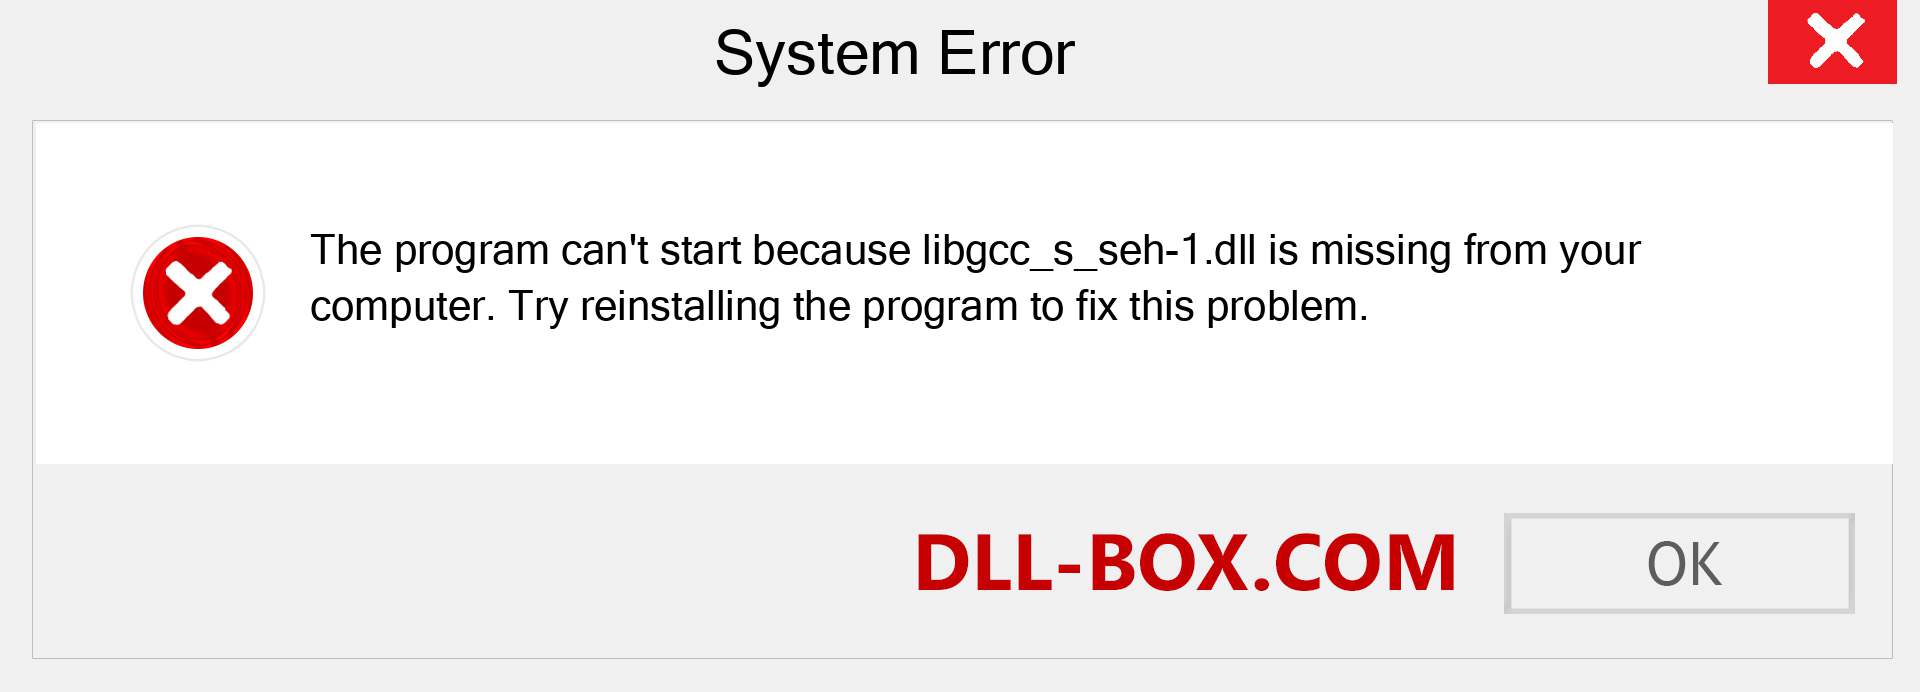  libgcc_s_seh-1.dll file is missing?. Download for Windows 7, 8, 10 - Fix  libgcc_s_seh-1 dll Missing Error on Windows, photos, images